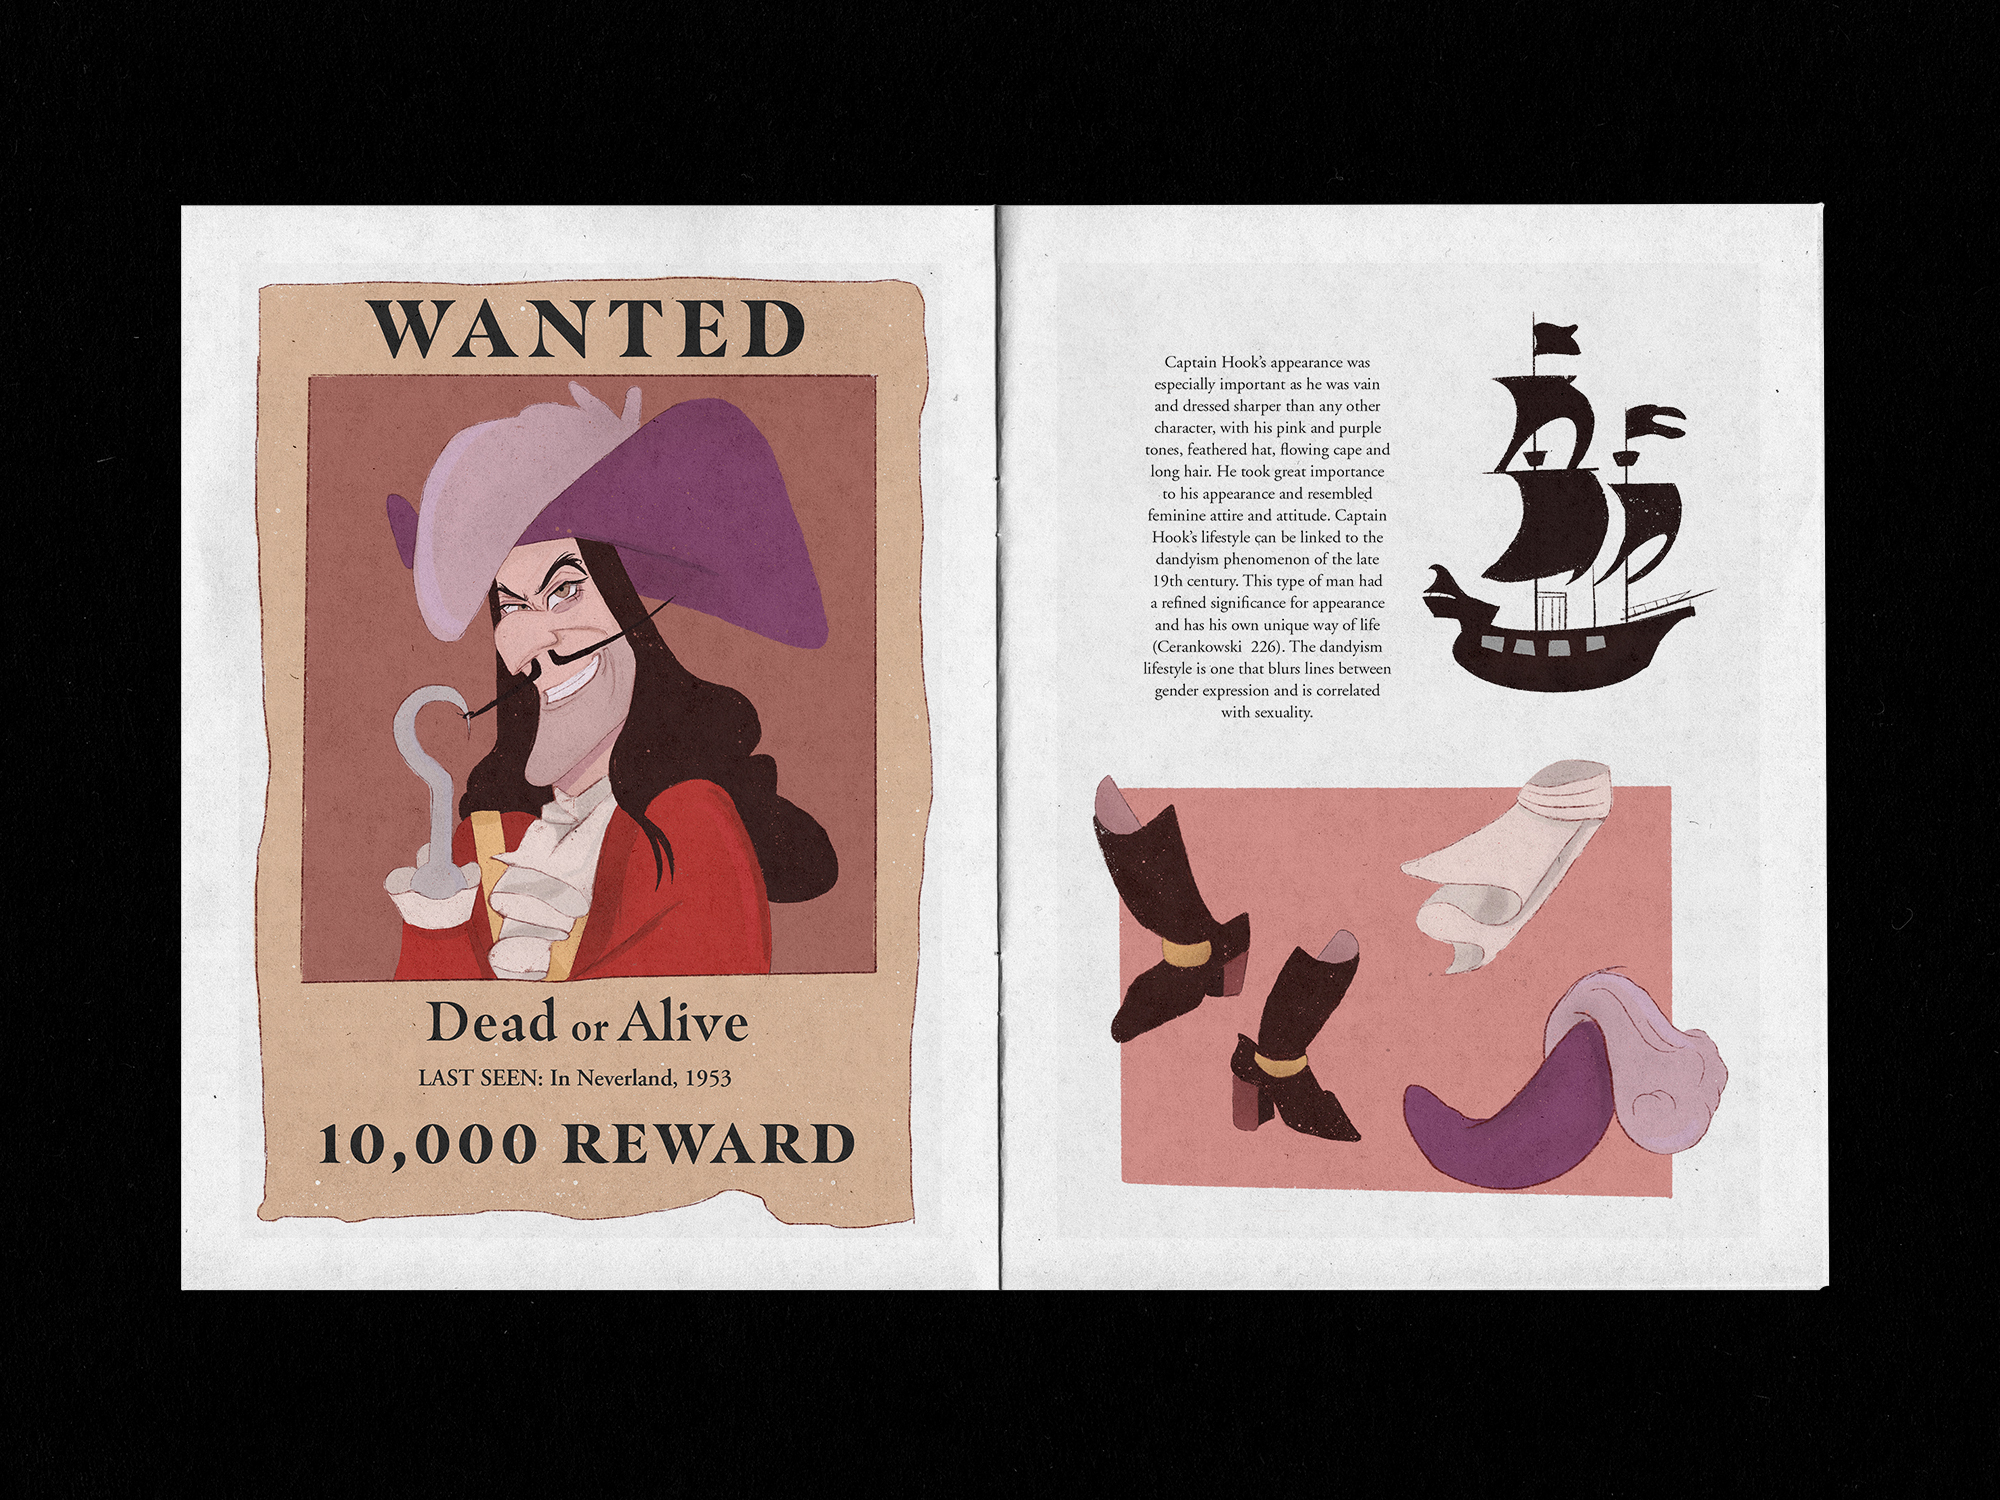 From the 'Character Guide Book' an examination on the Peter Pan villain, Captain Hook